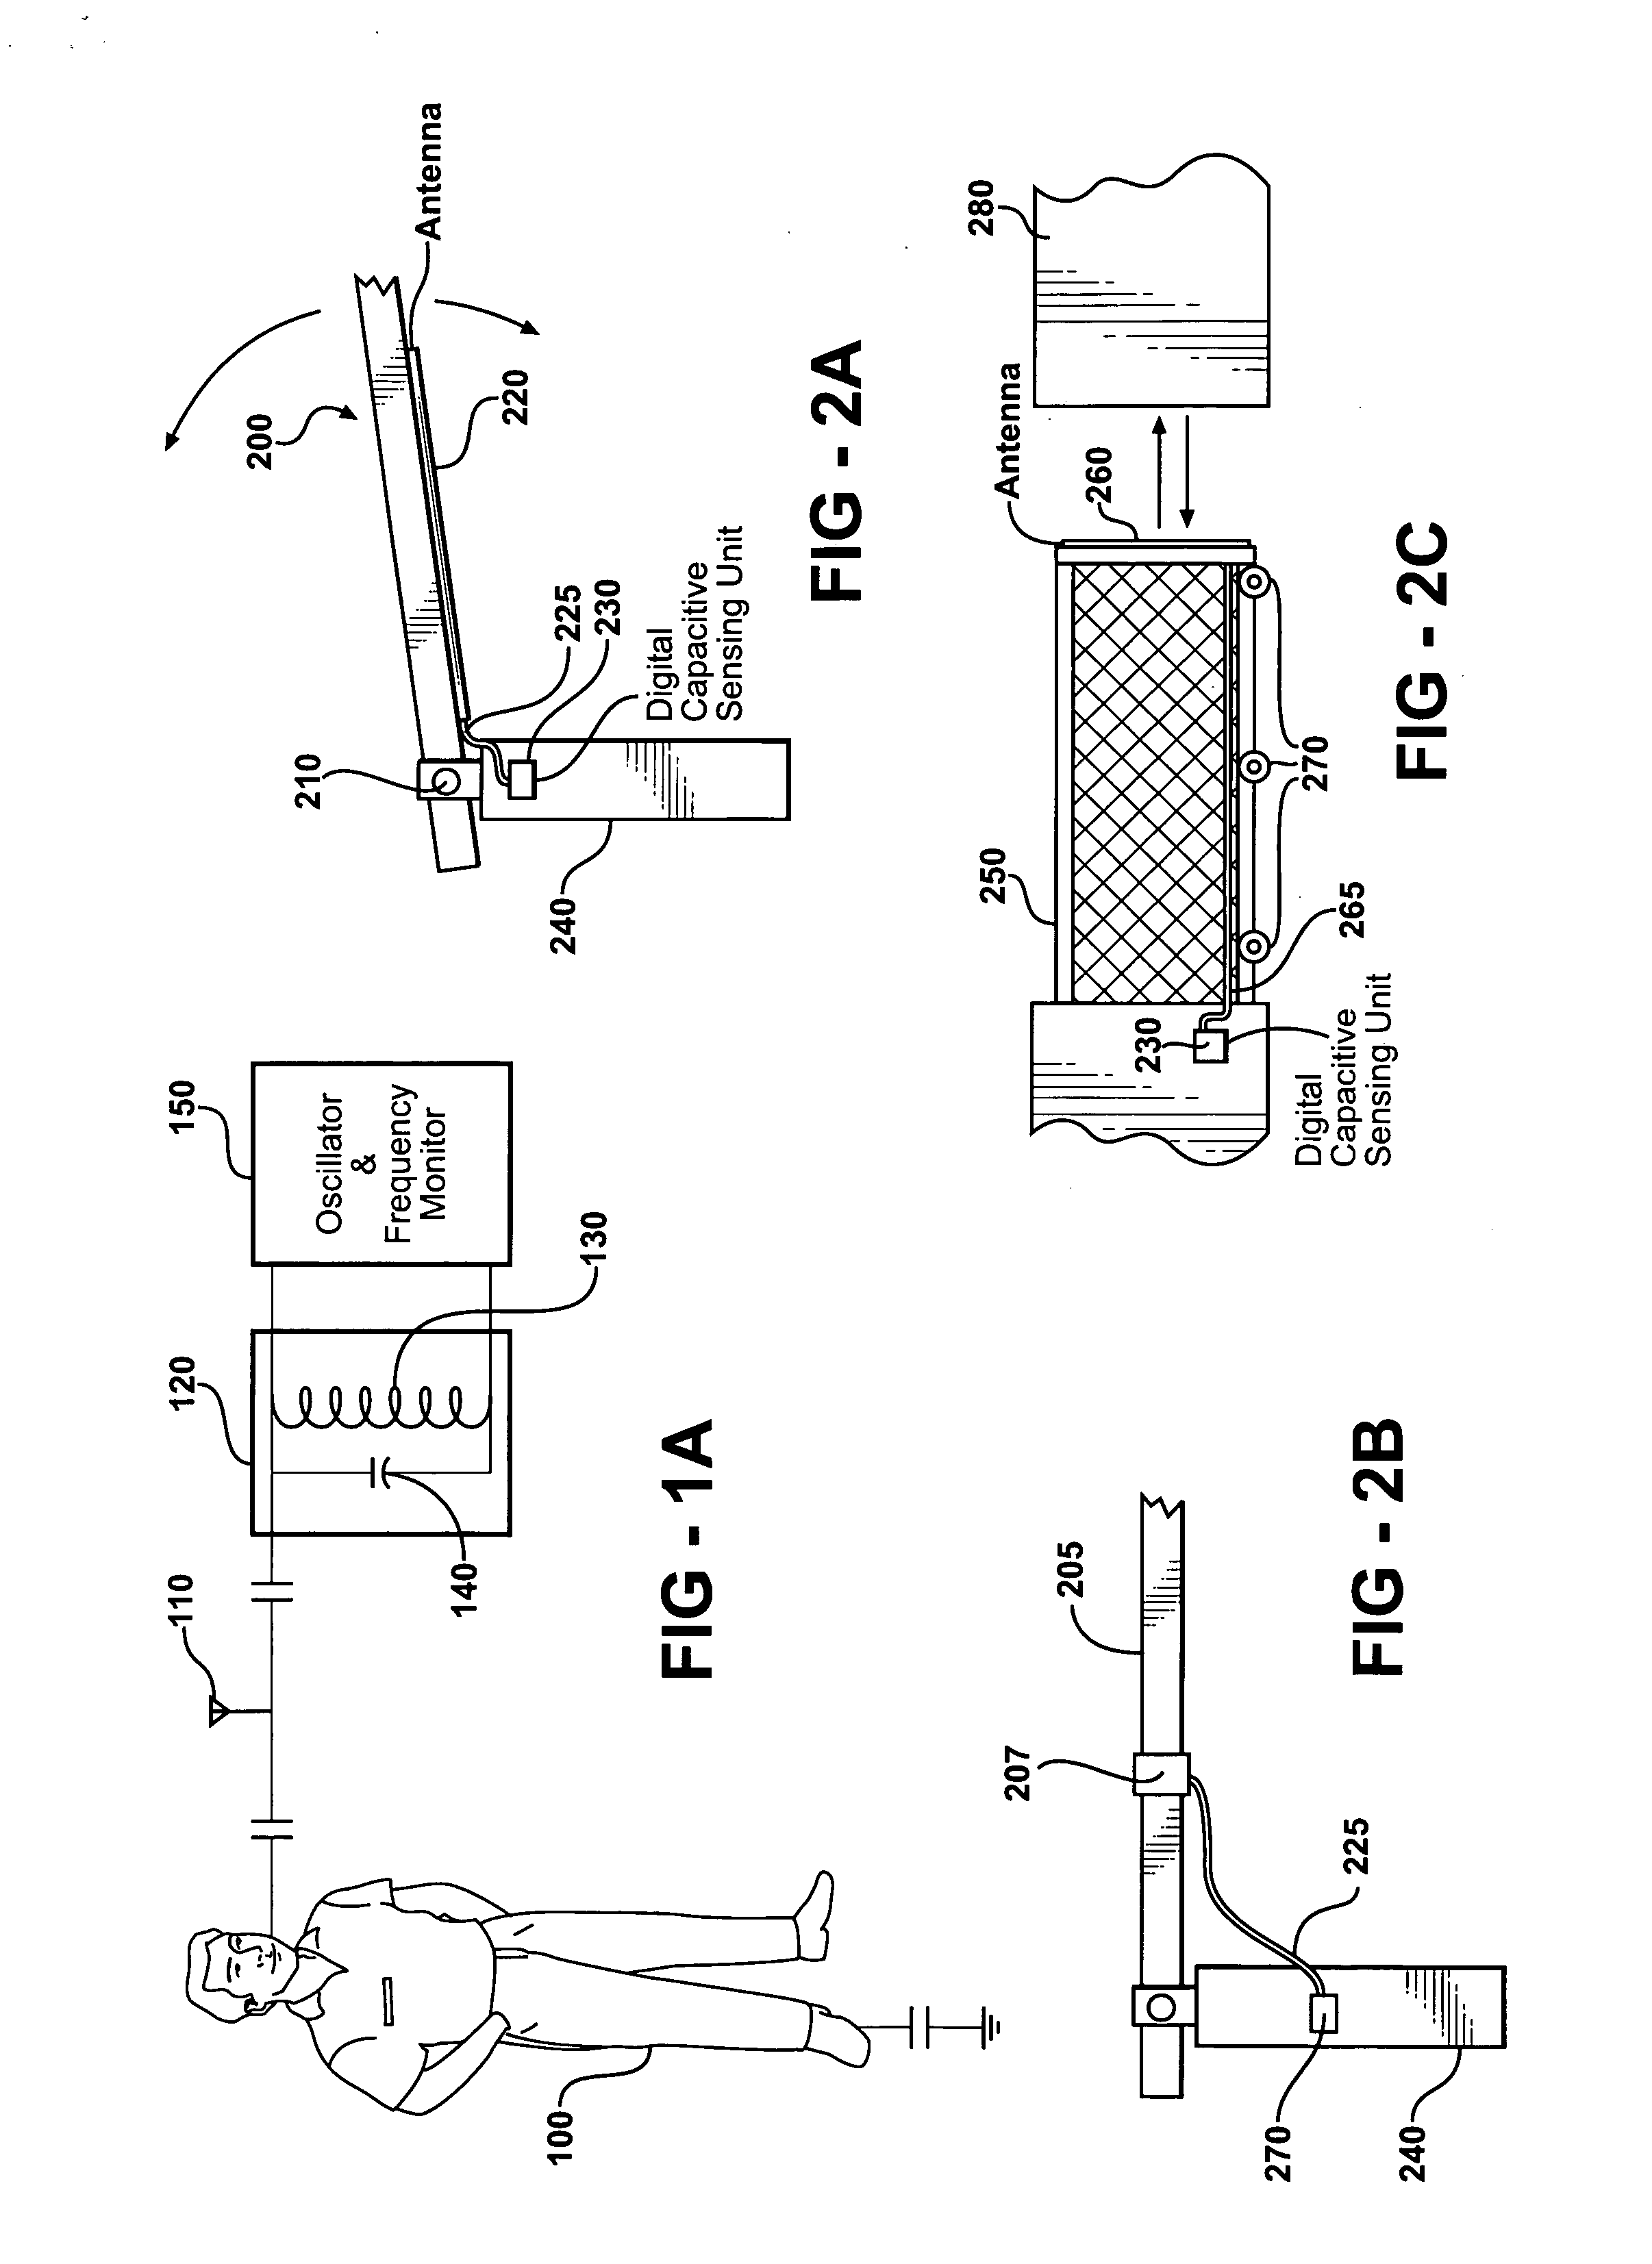 Digital capacitive sensing device for security and safety applications